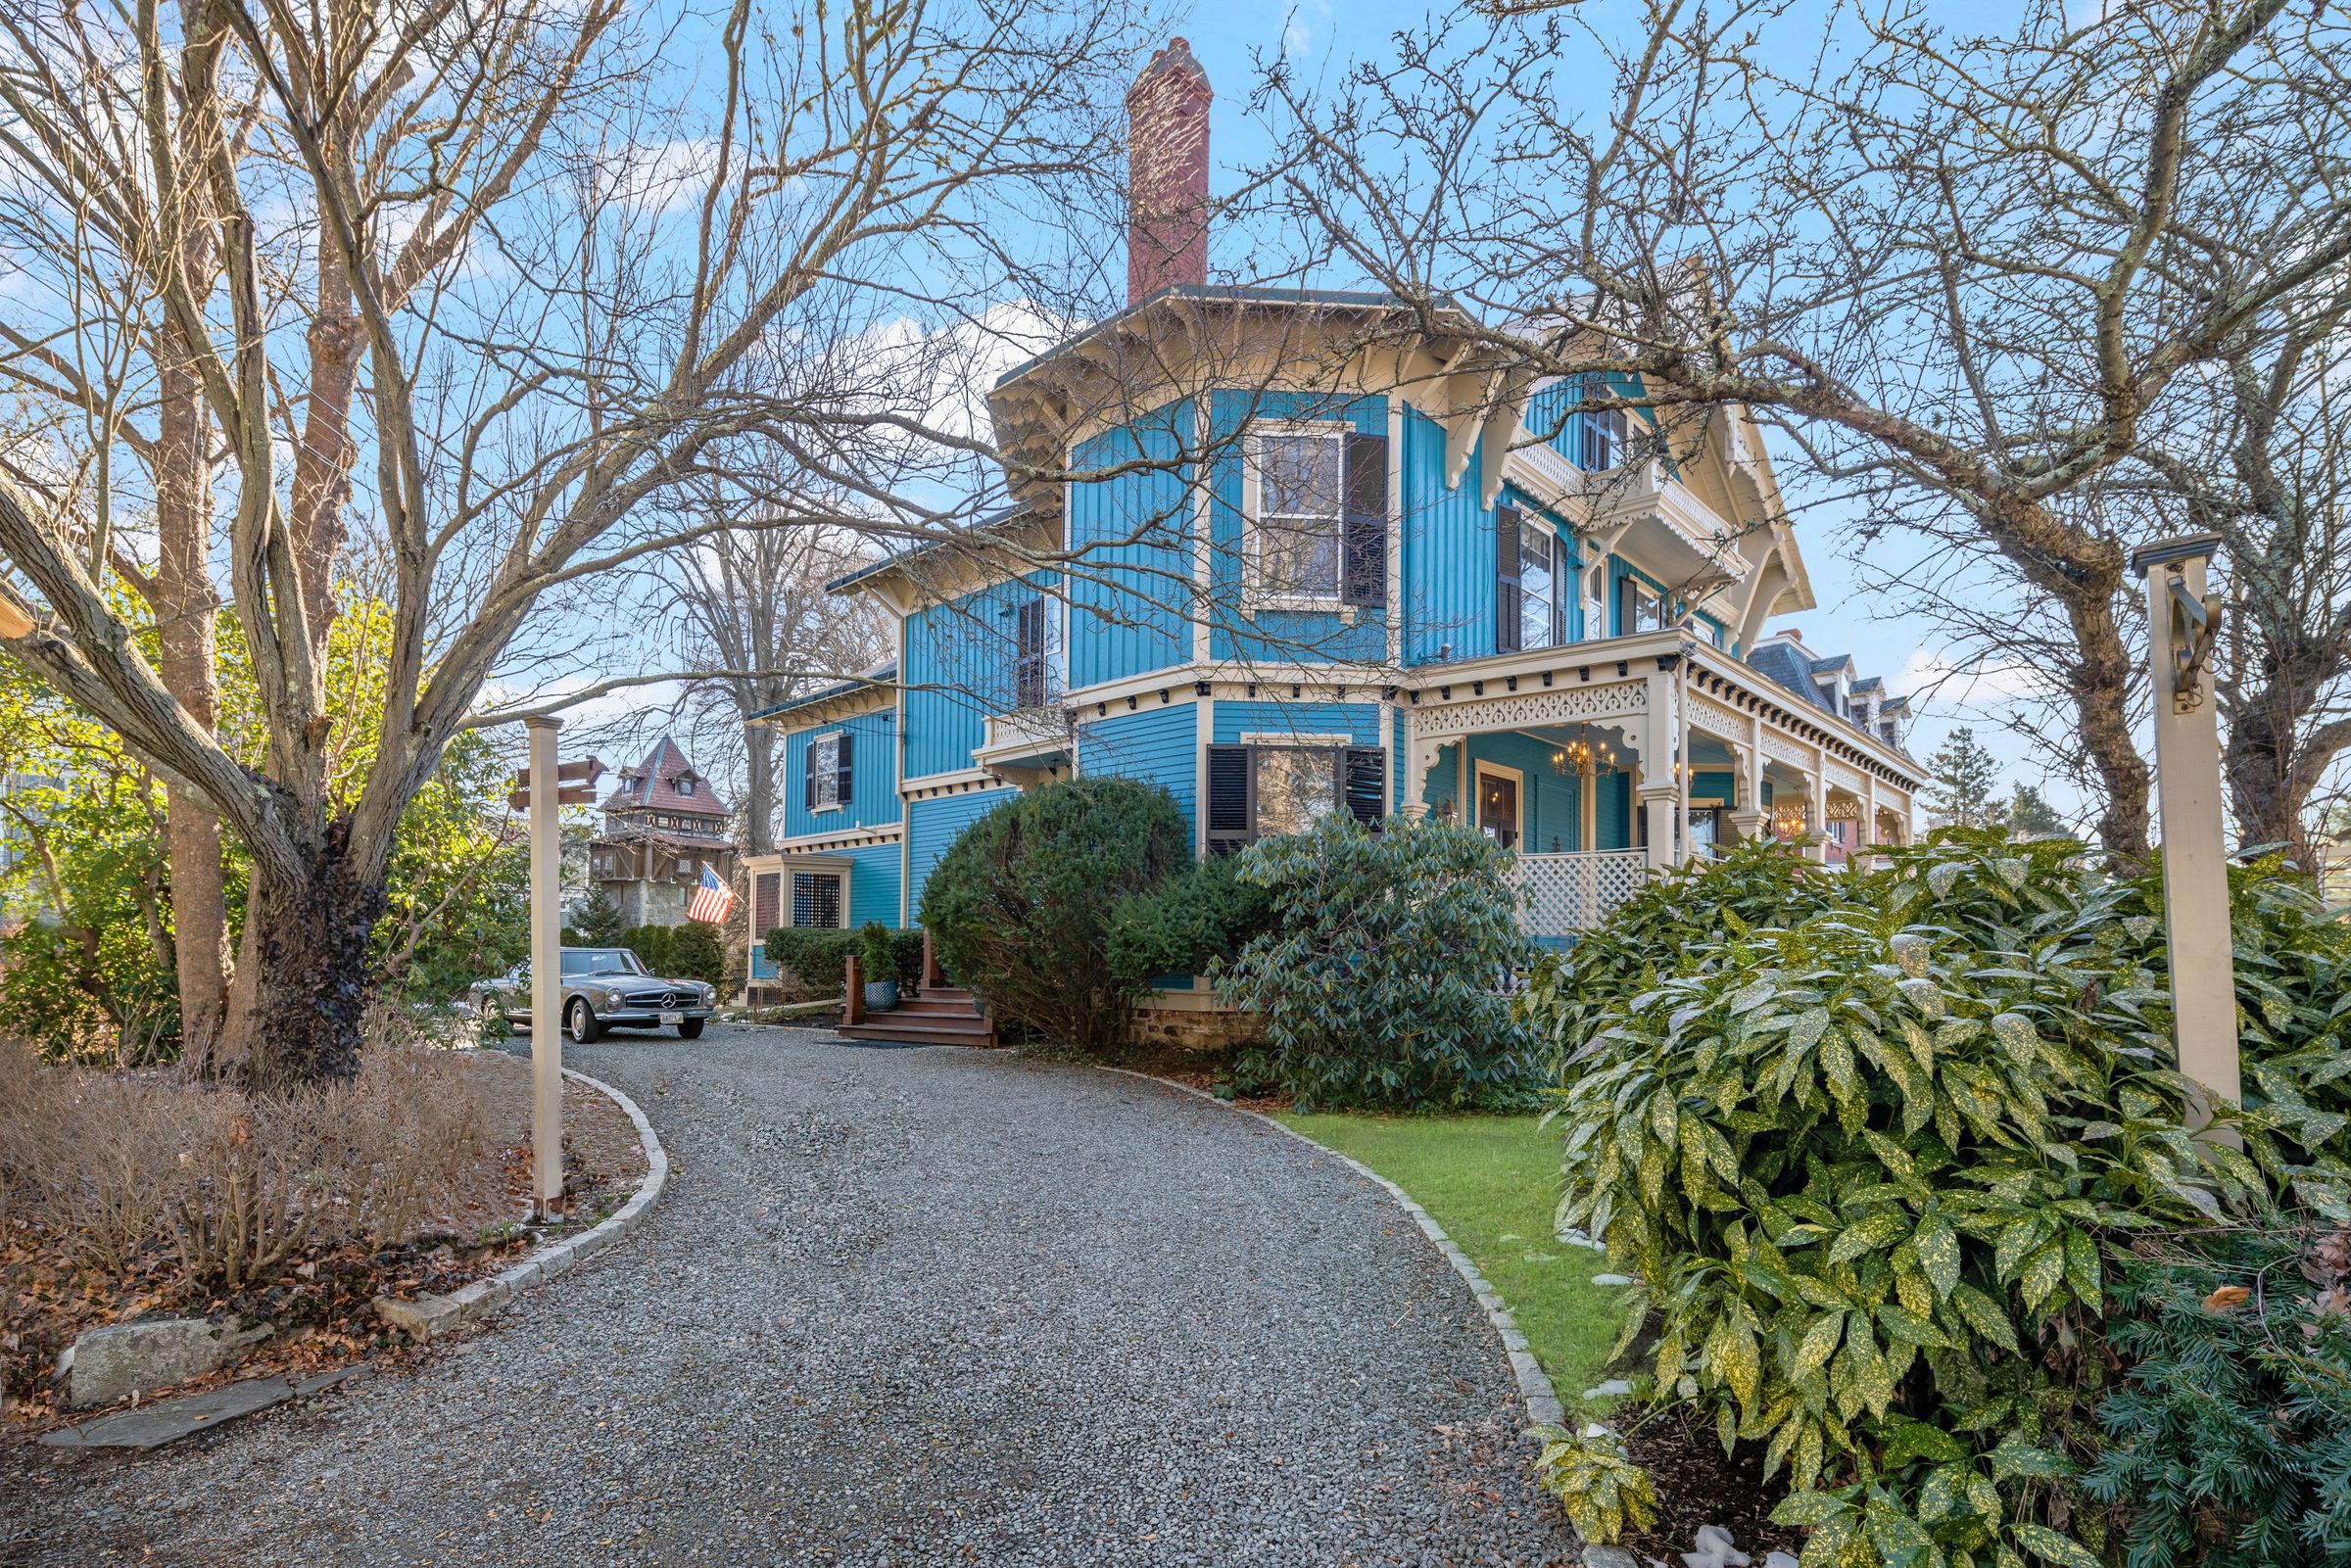 HOUSE OF THE WEEK: HISTORIC TOP-OF-THE-HILL NEWPORT COTTAGE OFFERED FOR $4,500,000